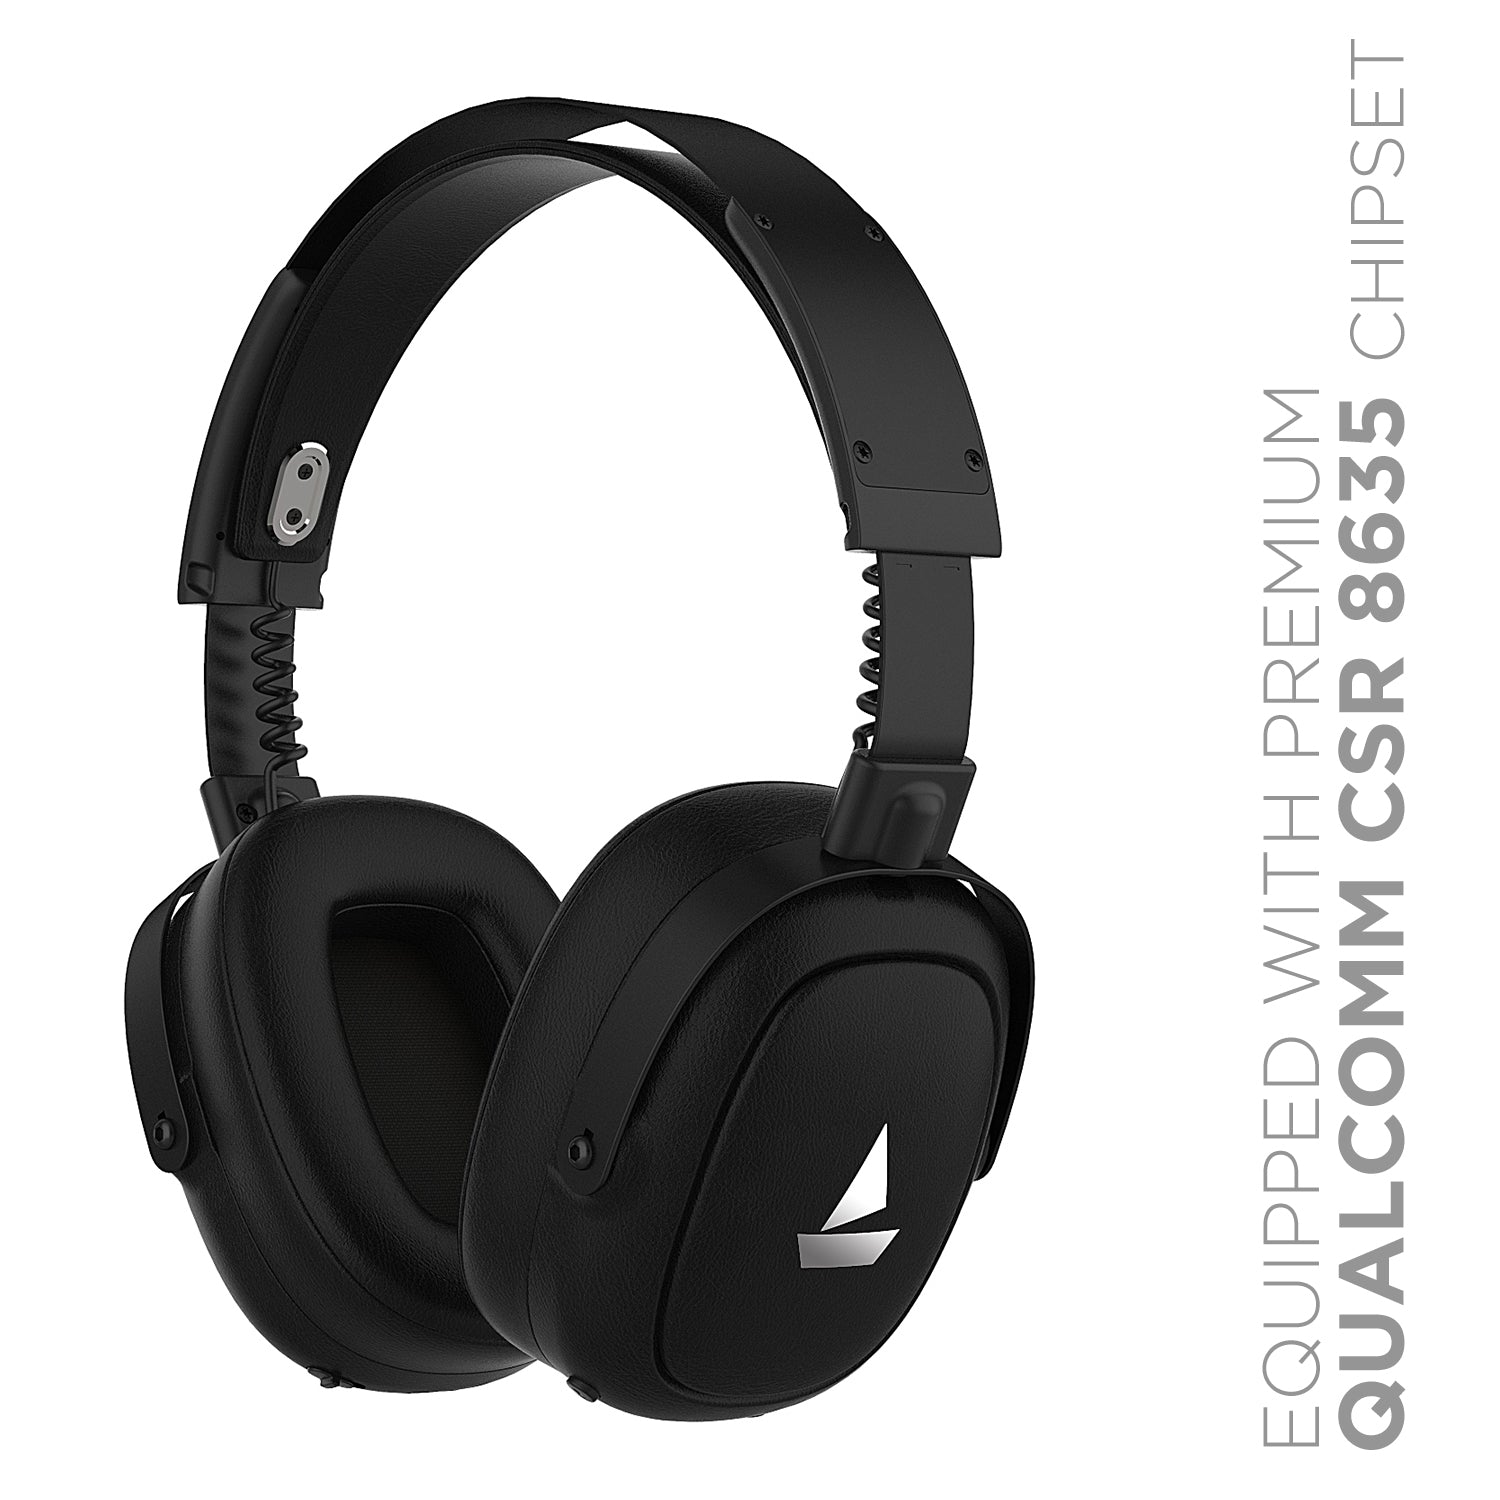 boAt Nirvanaa 717 ANC | Wireless Headphone with Bluetooth v5.0, 40mm drivers, Active Noise Cancellation - boAt Lifestyle